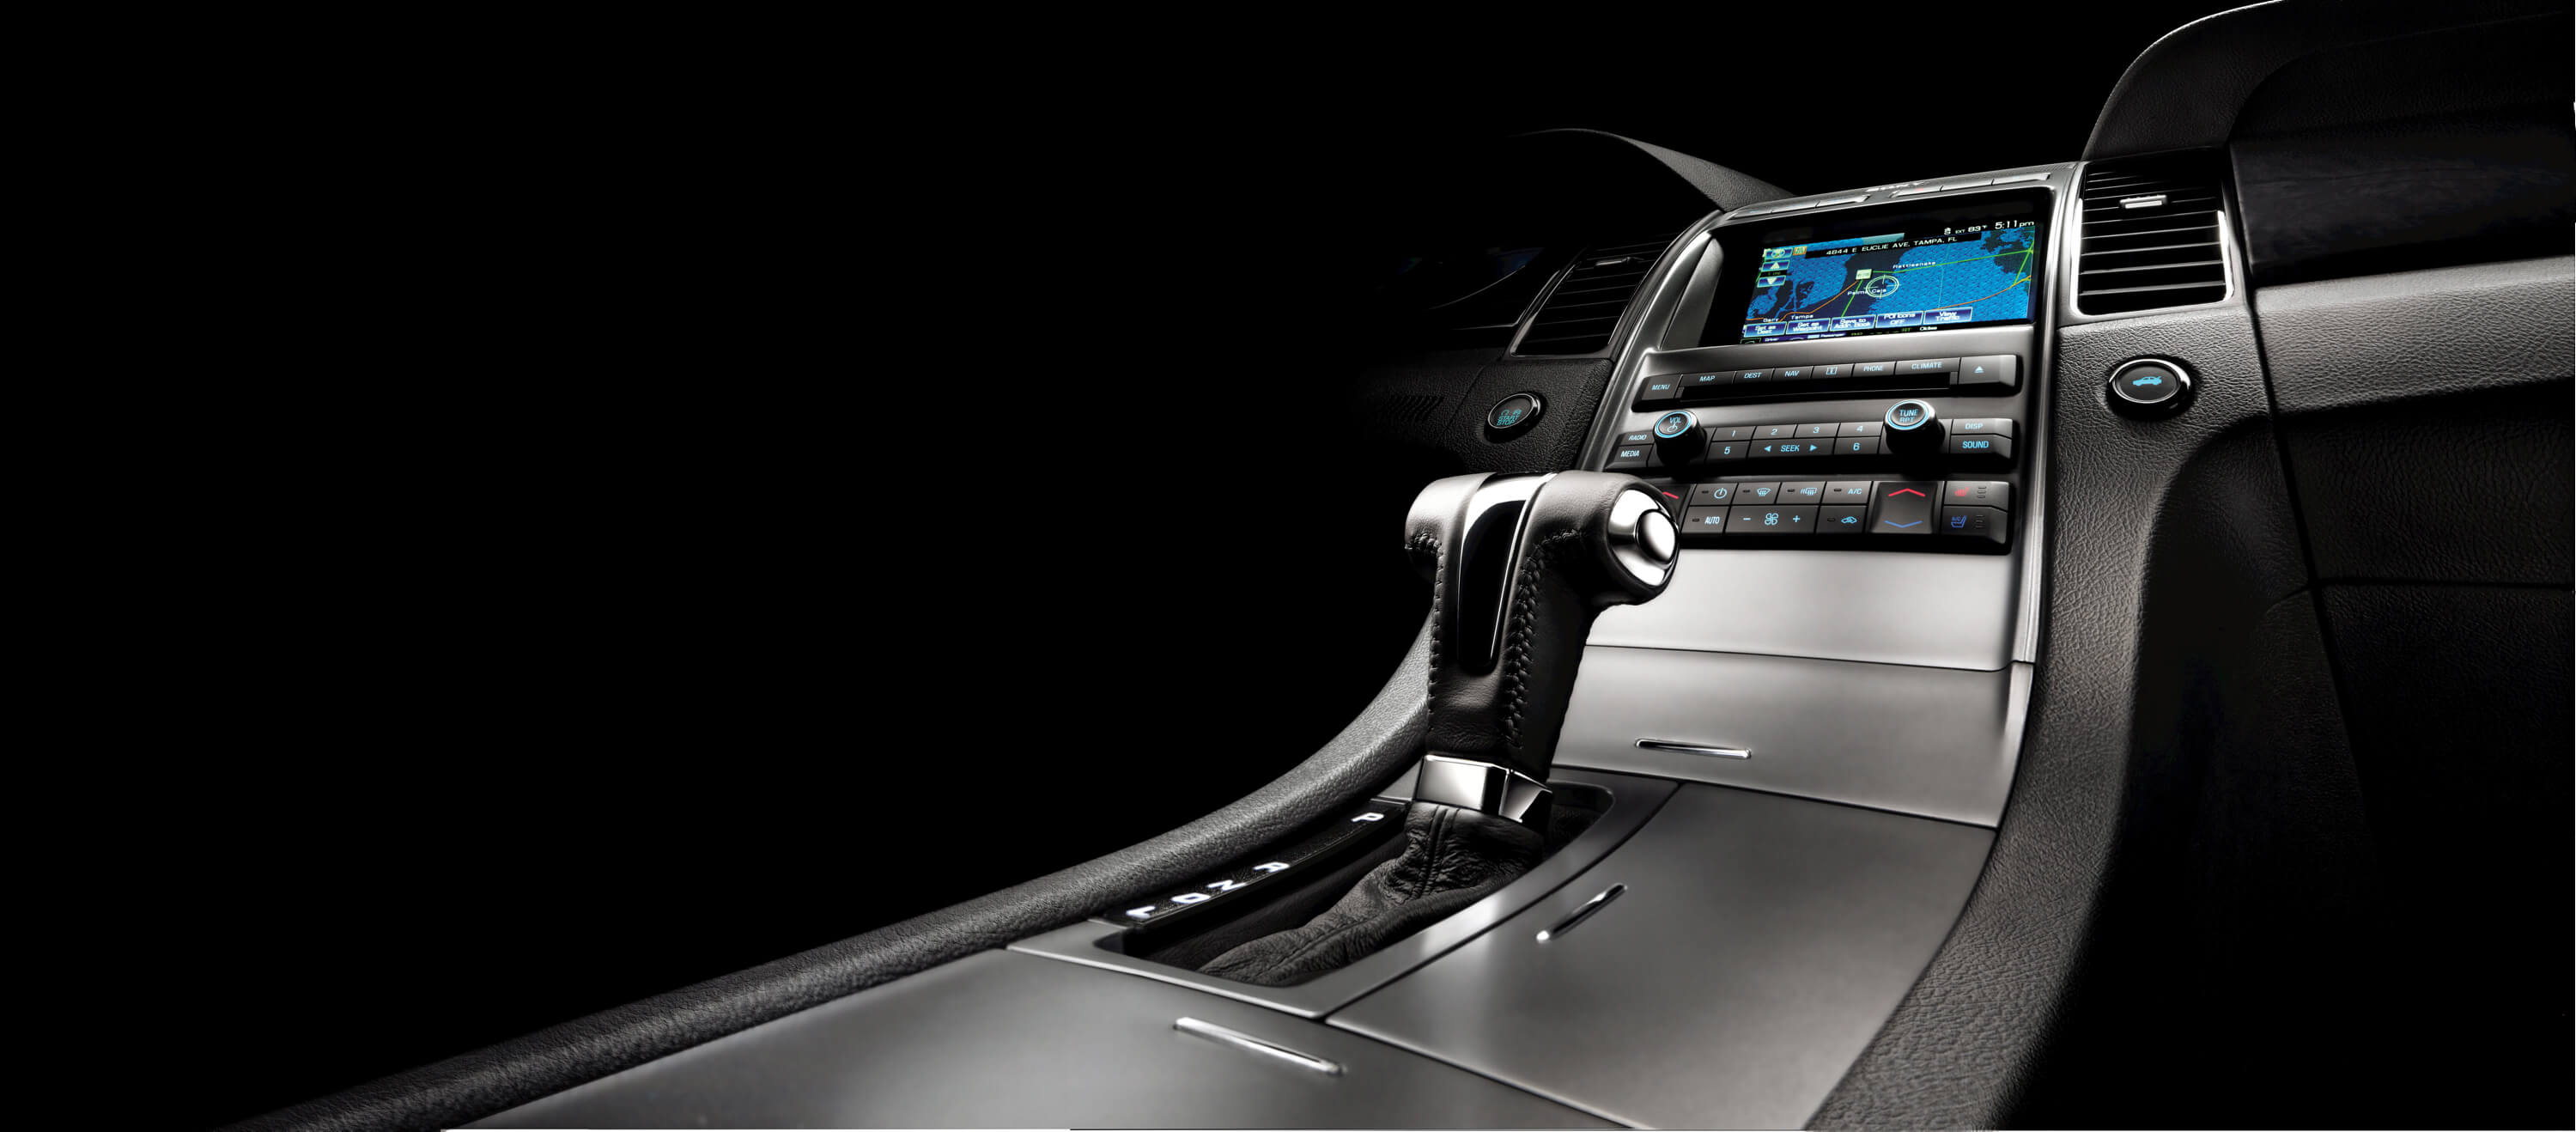 Ford Taurus' impossible-angle console by Zaback